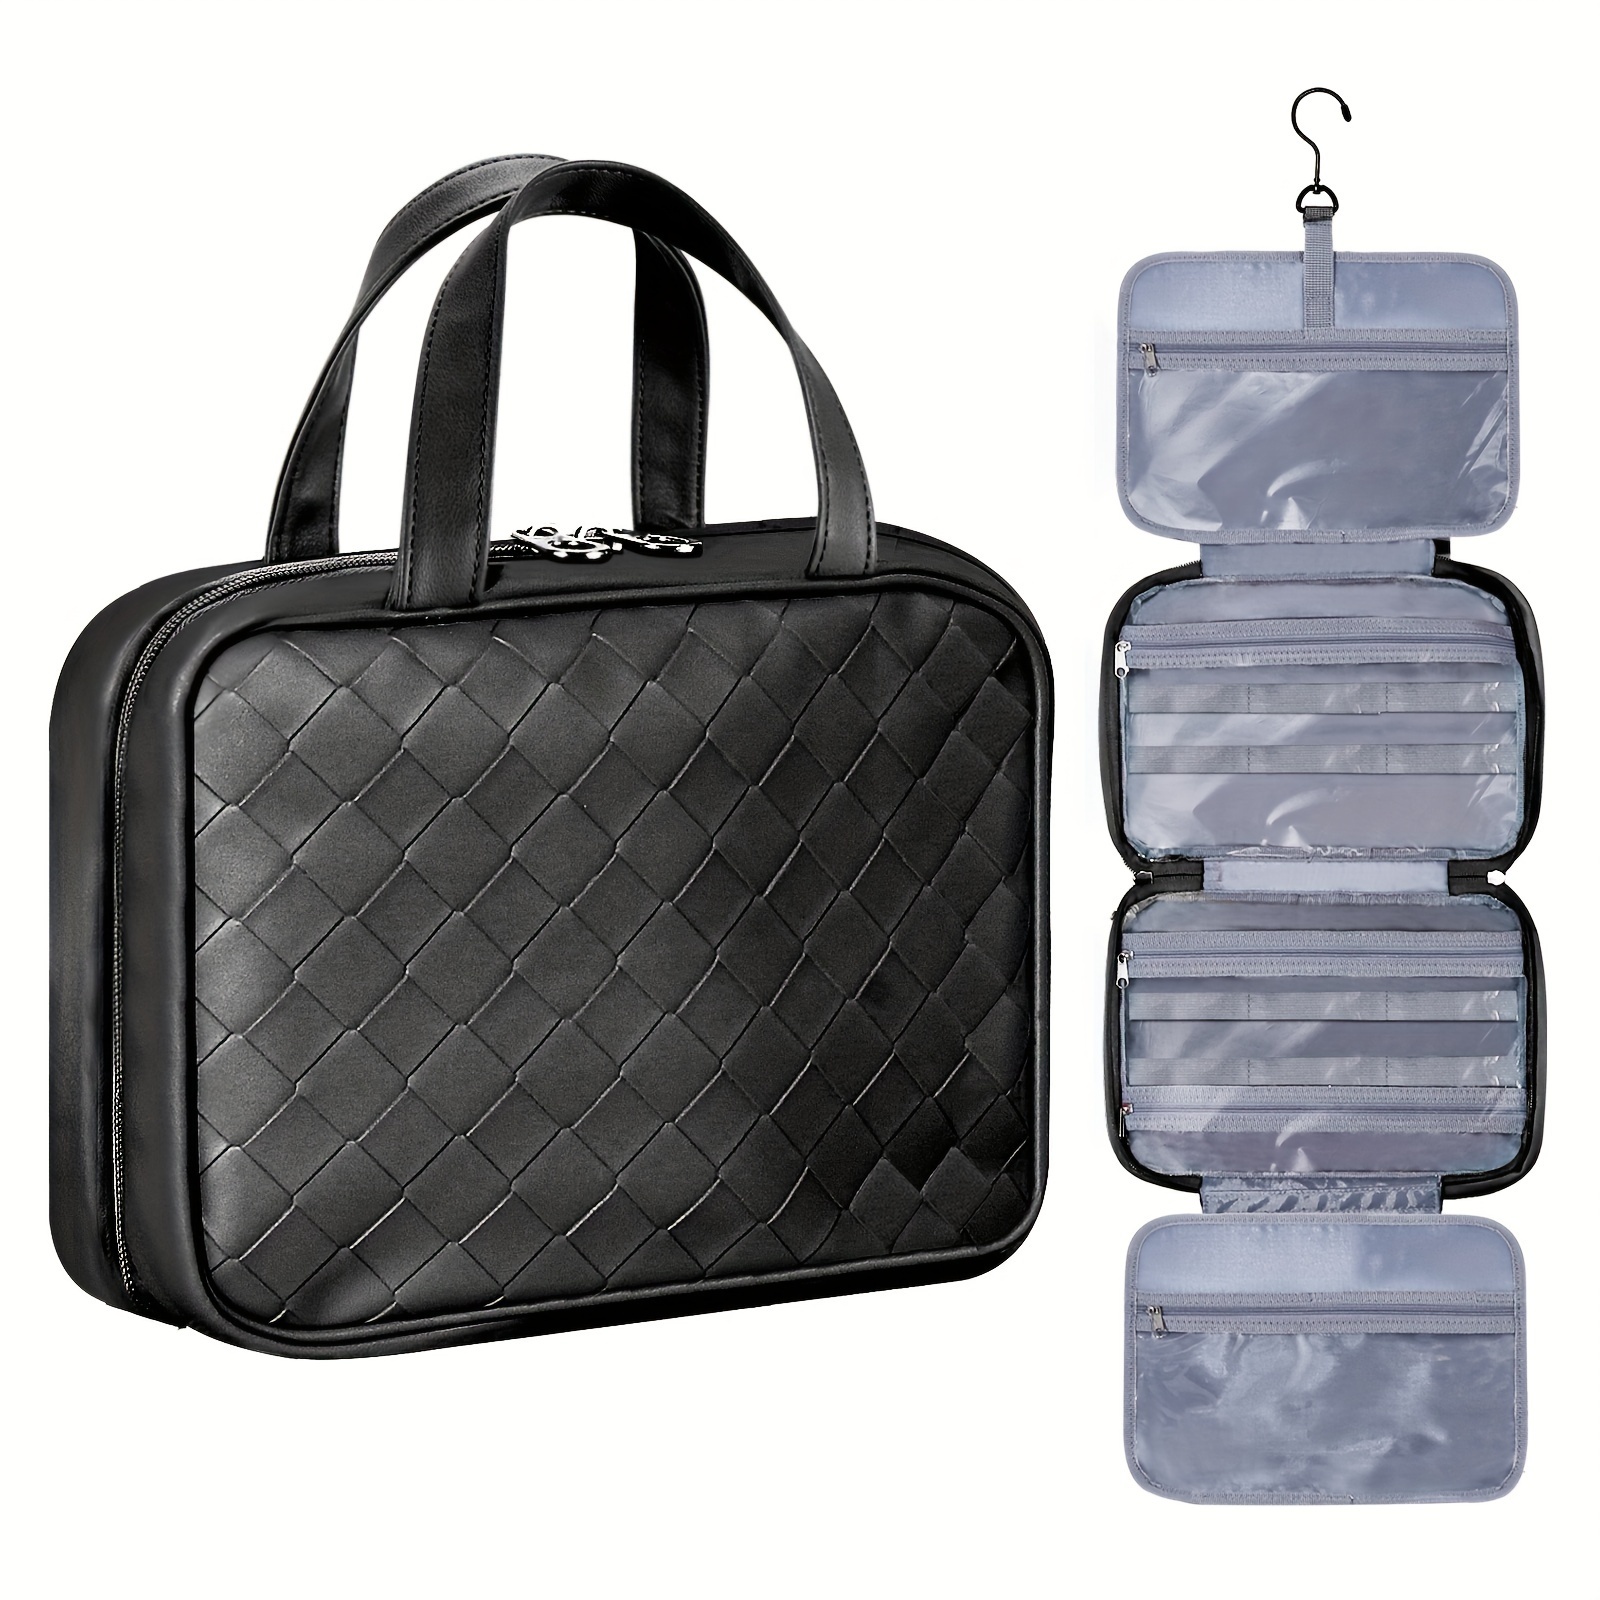 

Multi-functional Travel Toiletries Bag Organized To Hold Toiletries, Cosmetics, With Hooks And Waterproof Material Design, Full-size Container